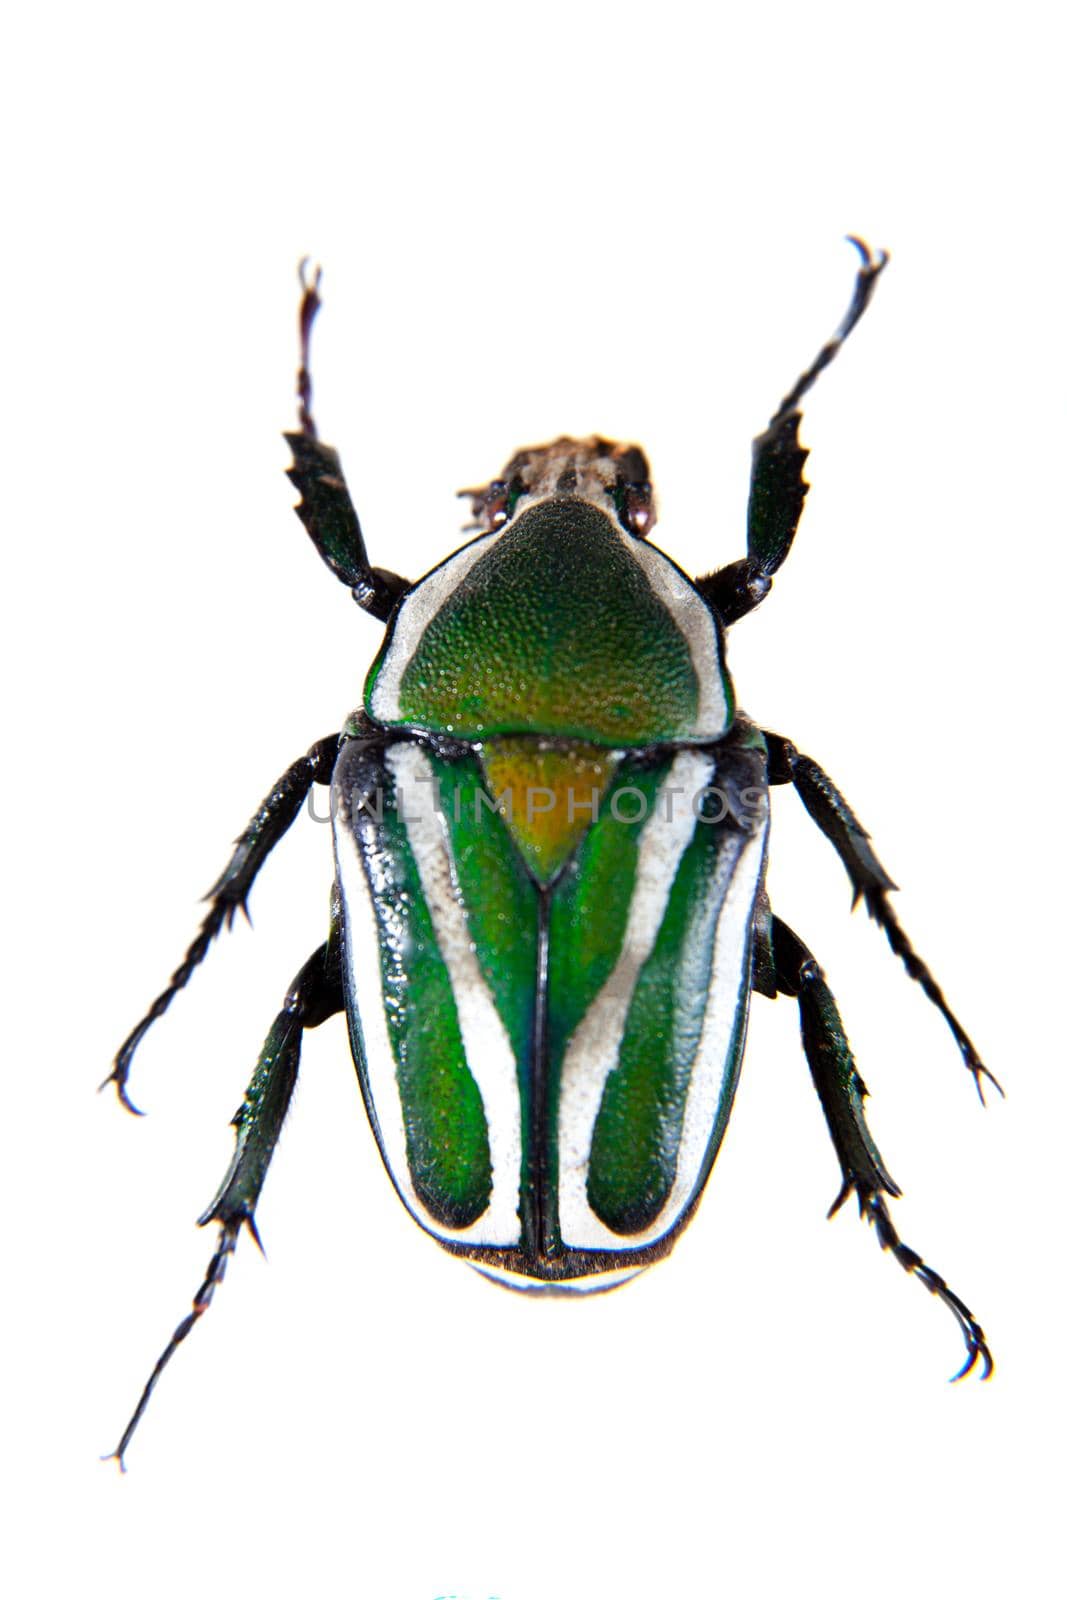 Stripped green beetle in museum isolated on the white background